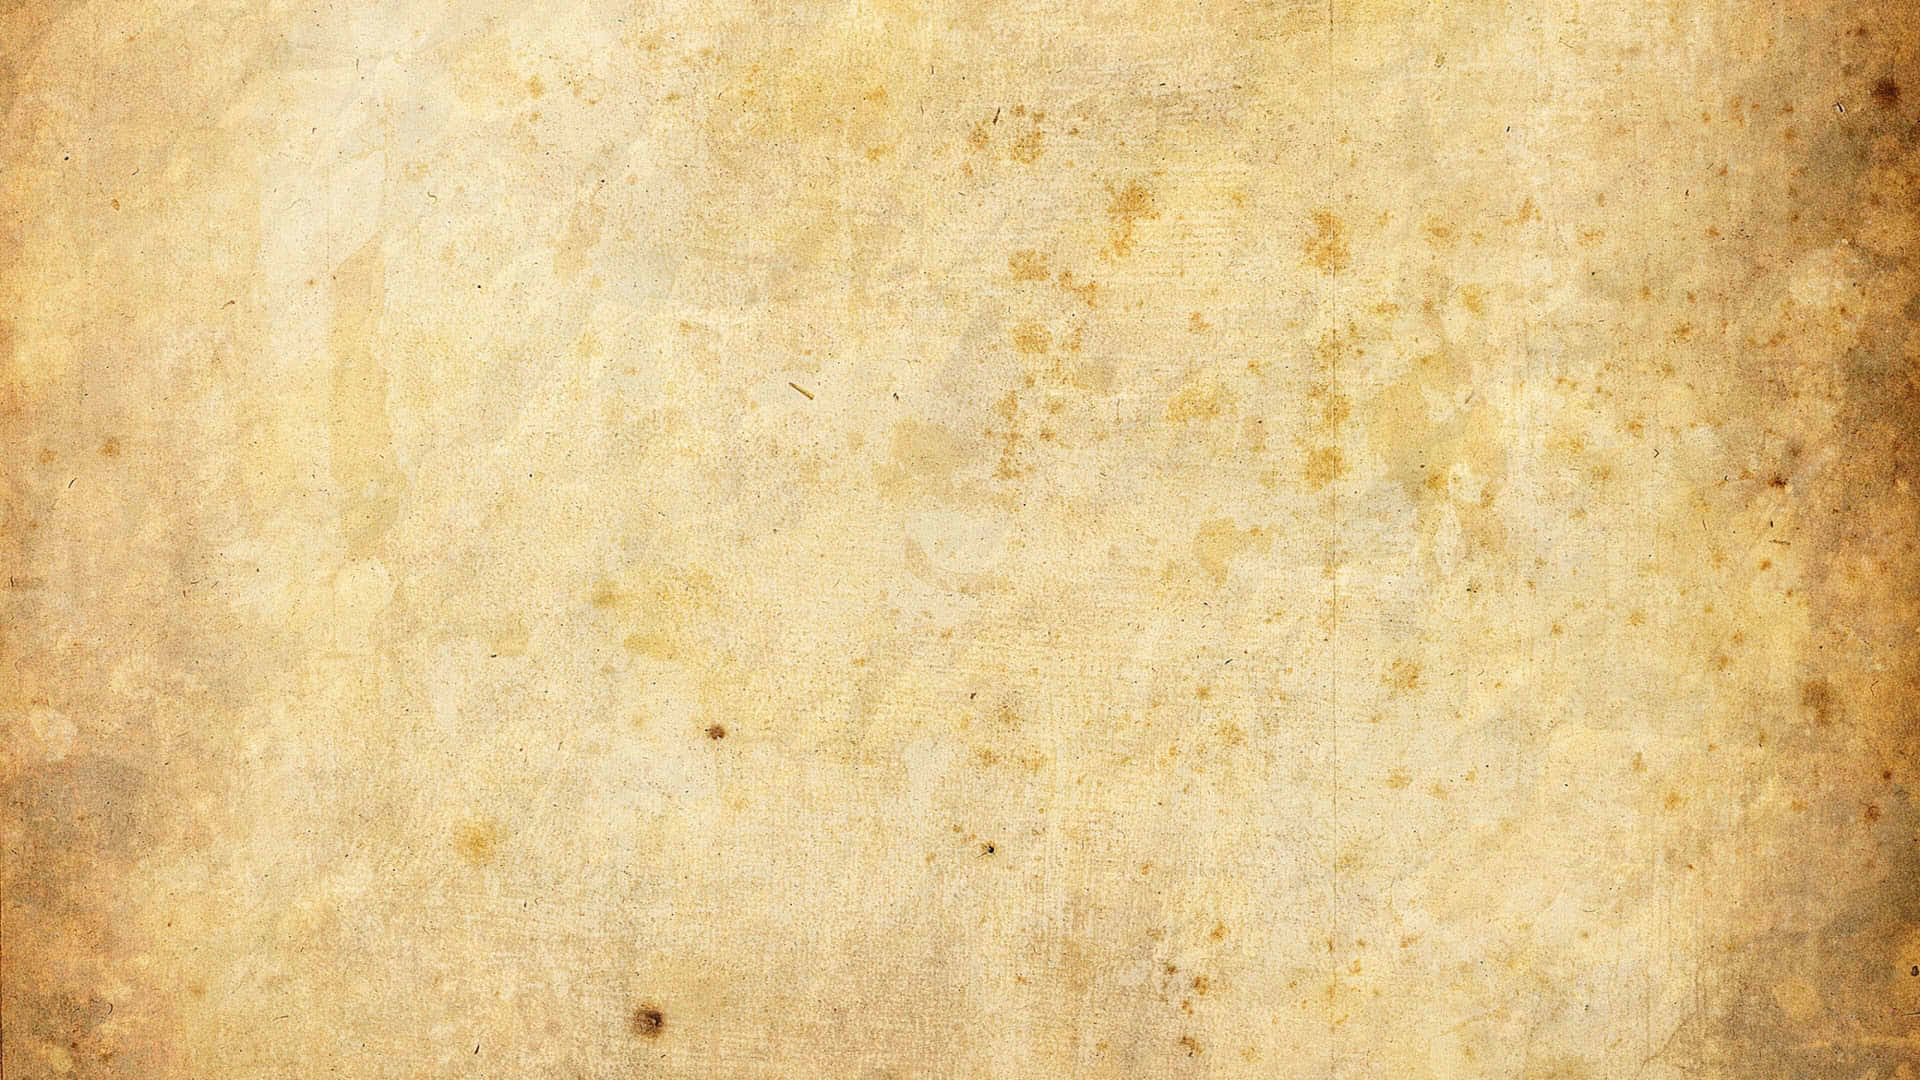 Vintage Background with an Old Brown Paper Texture